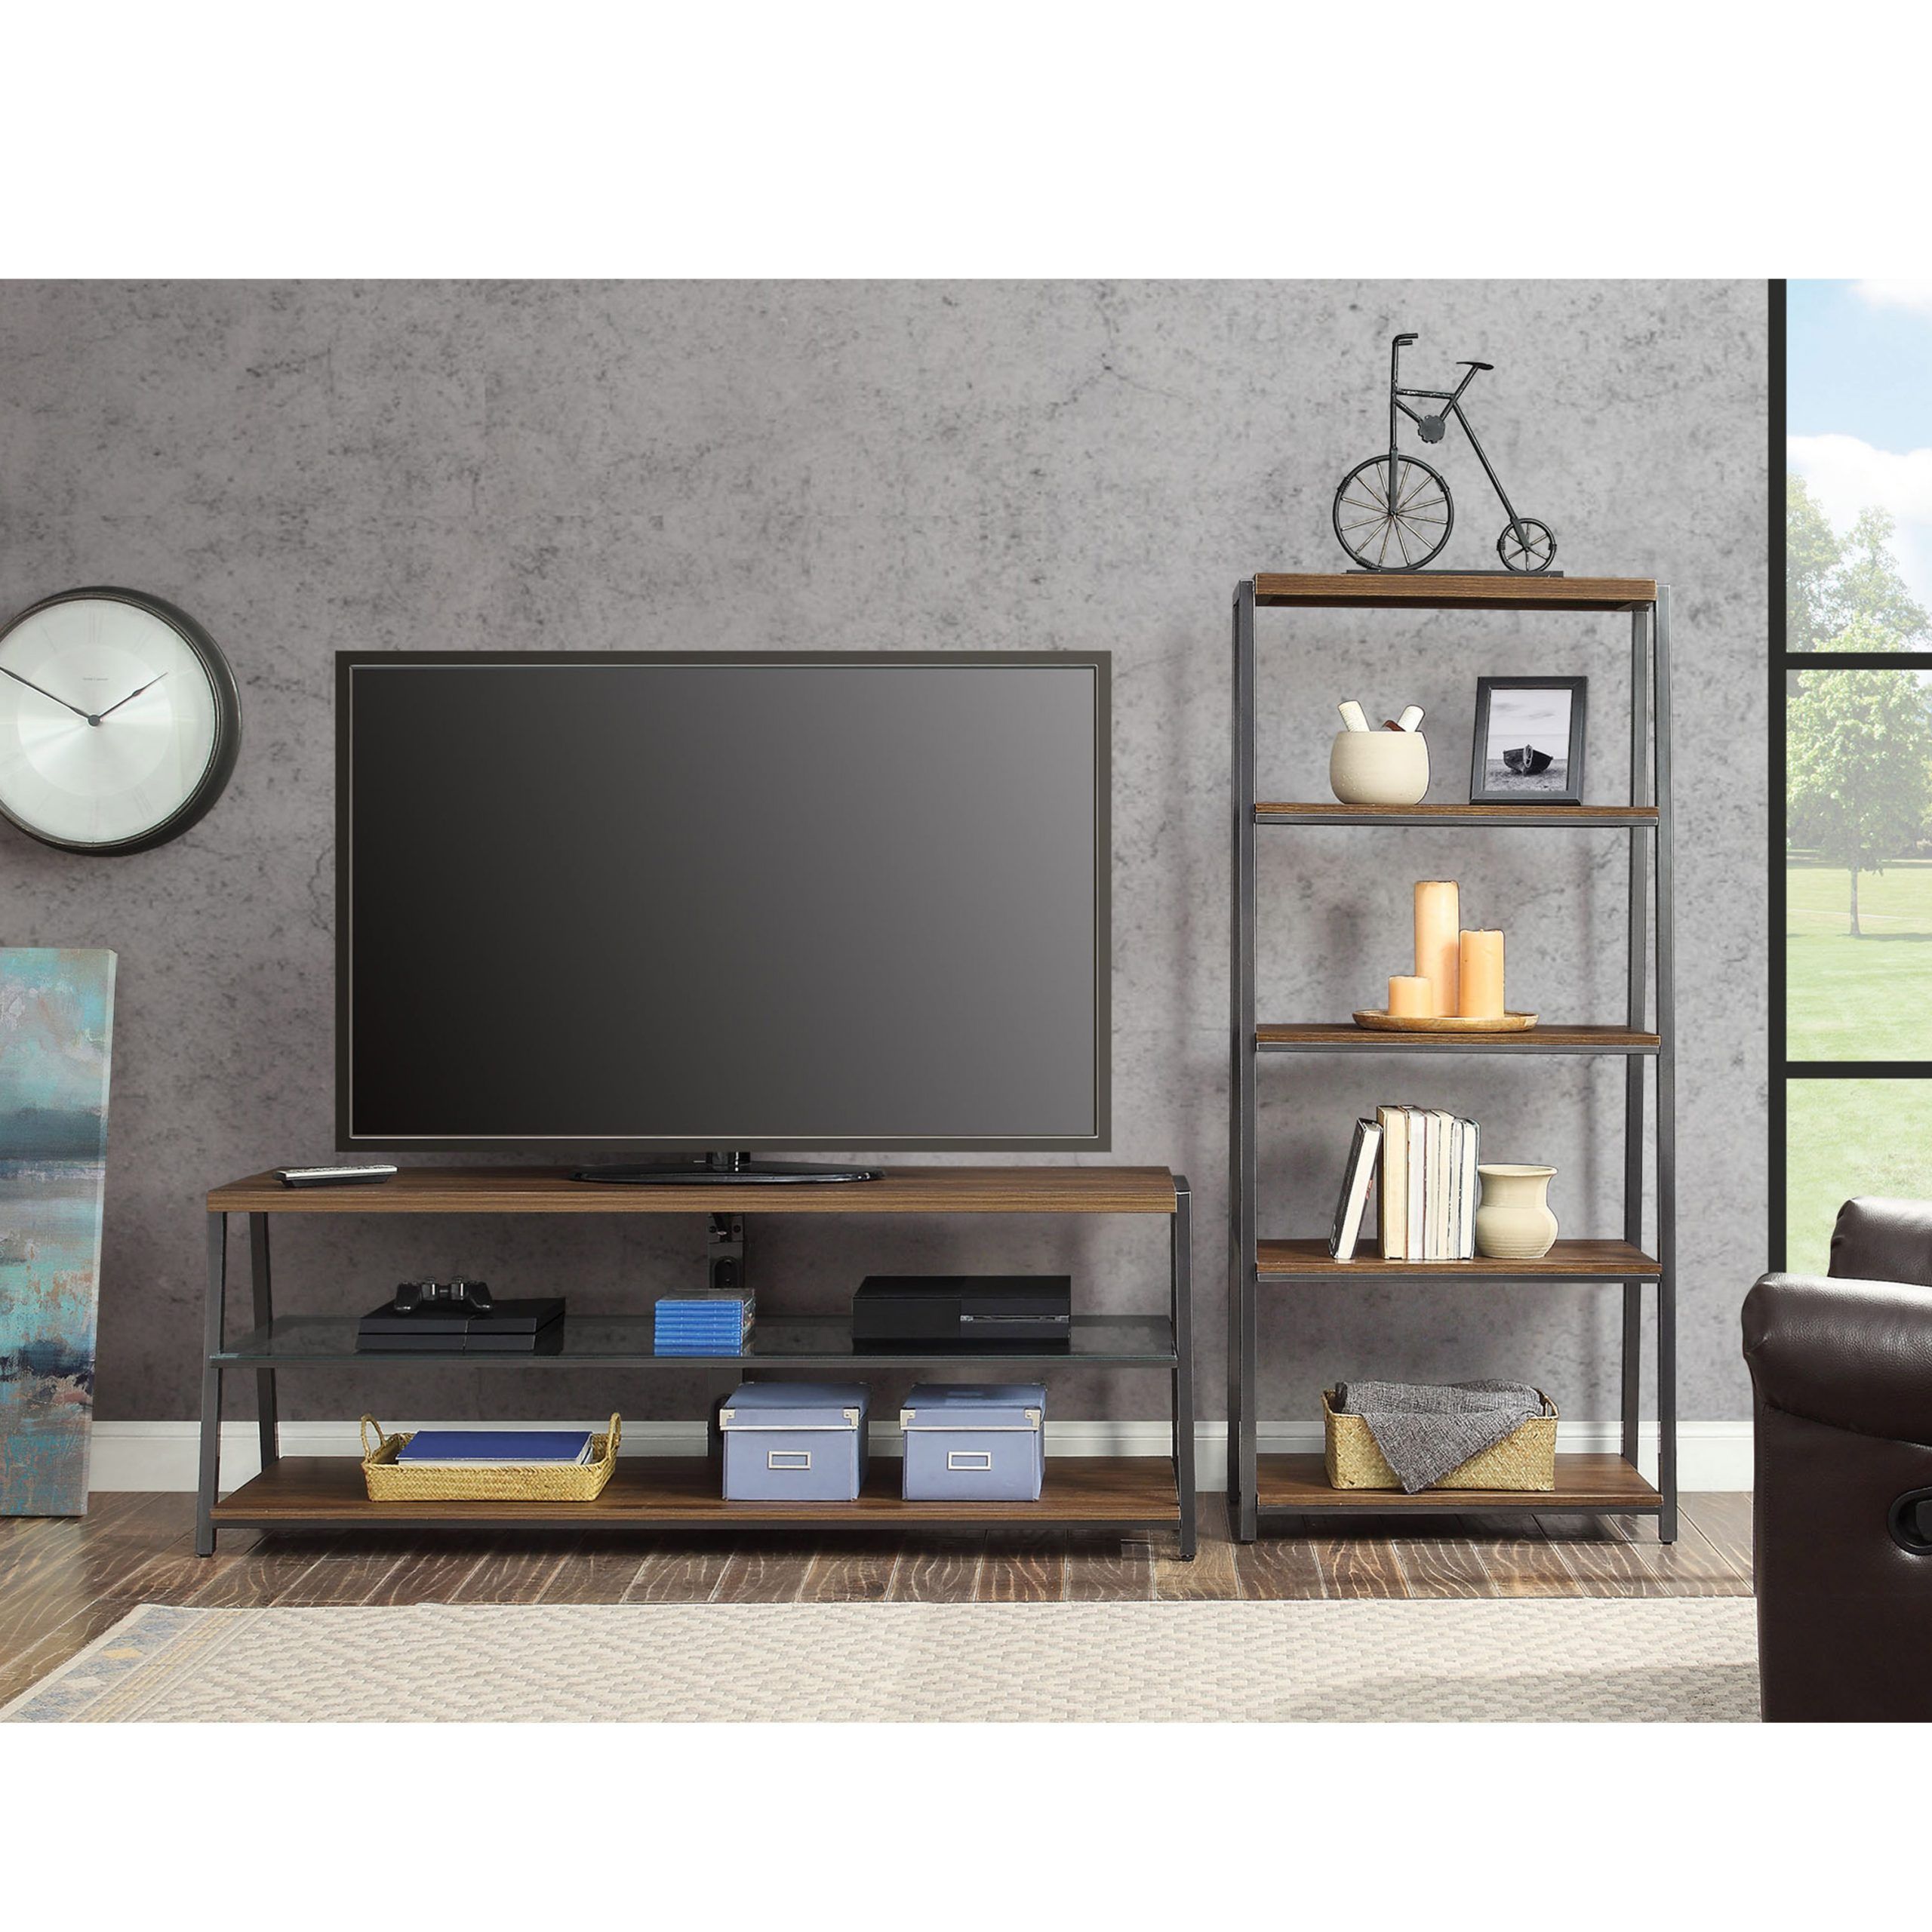 Featured Photo of 20 Best Ideas Mainstays Arris 3-in-1 Tv Stands in Canyon Walnut Finish